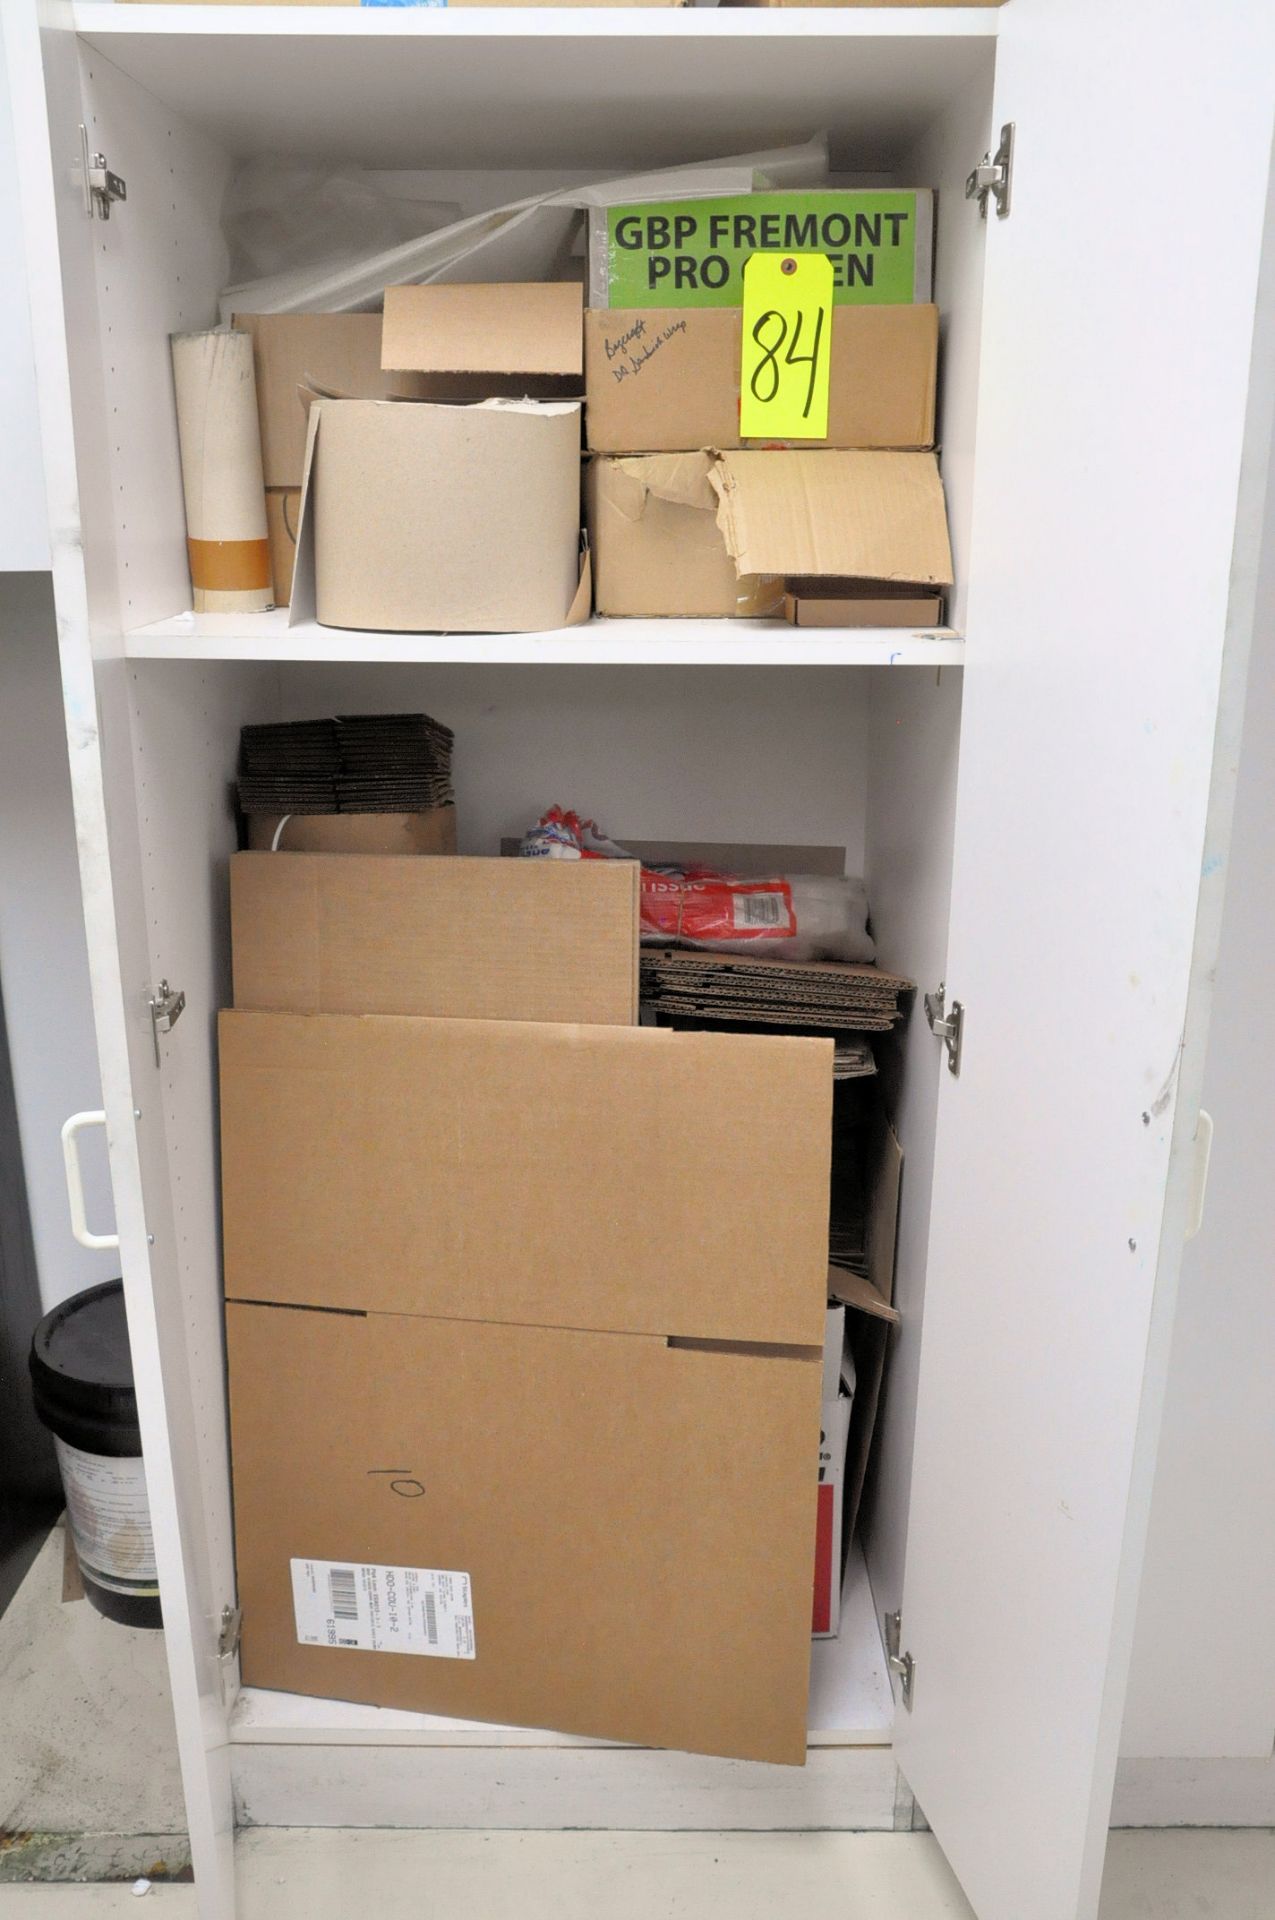 Lot-Shipping Supplies in (2) Cabinets, (Cabinets Not Included), with Drum of Styrofoam Peanuts - Image 2 of 3